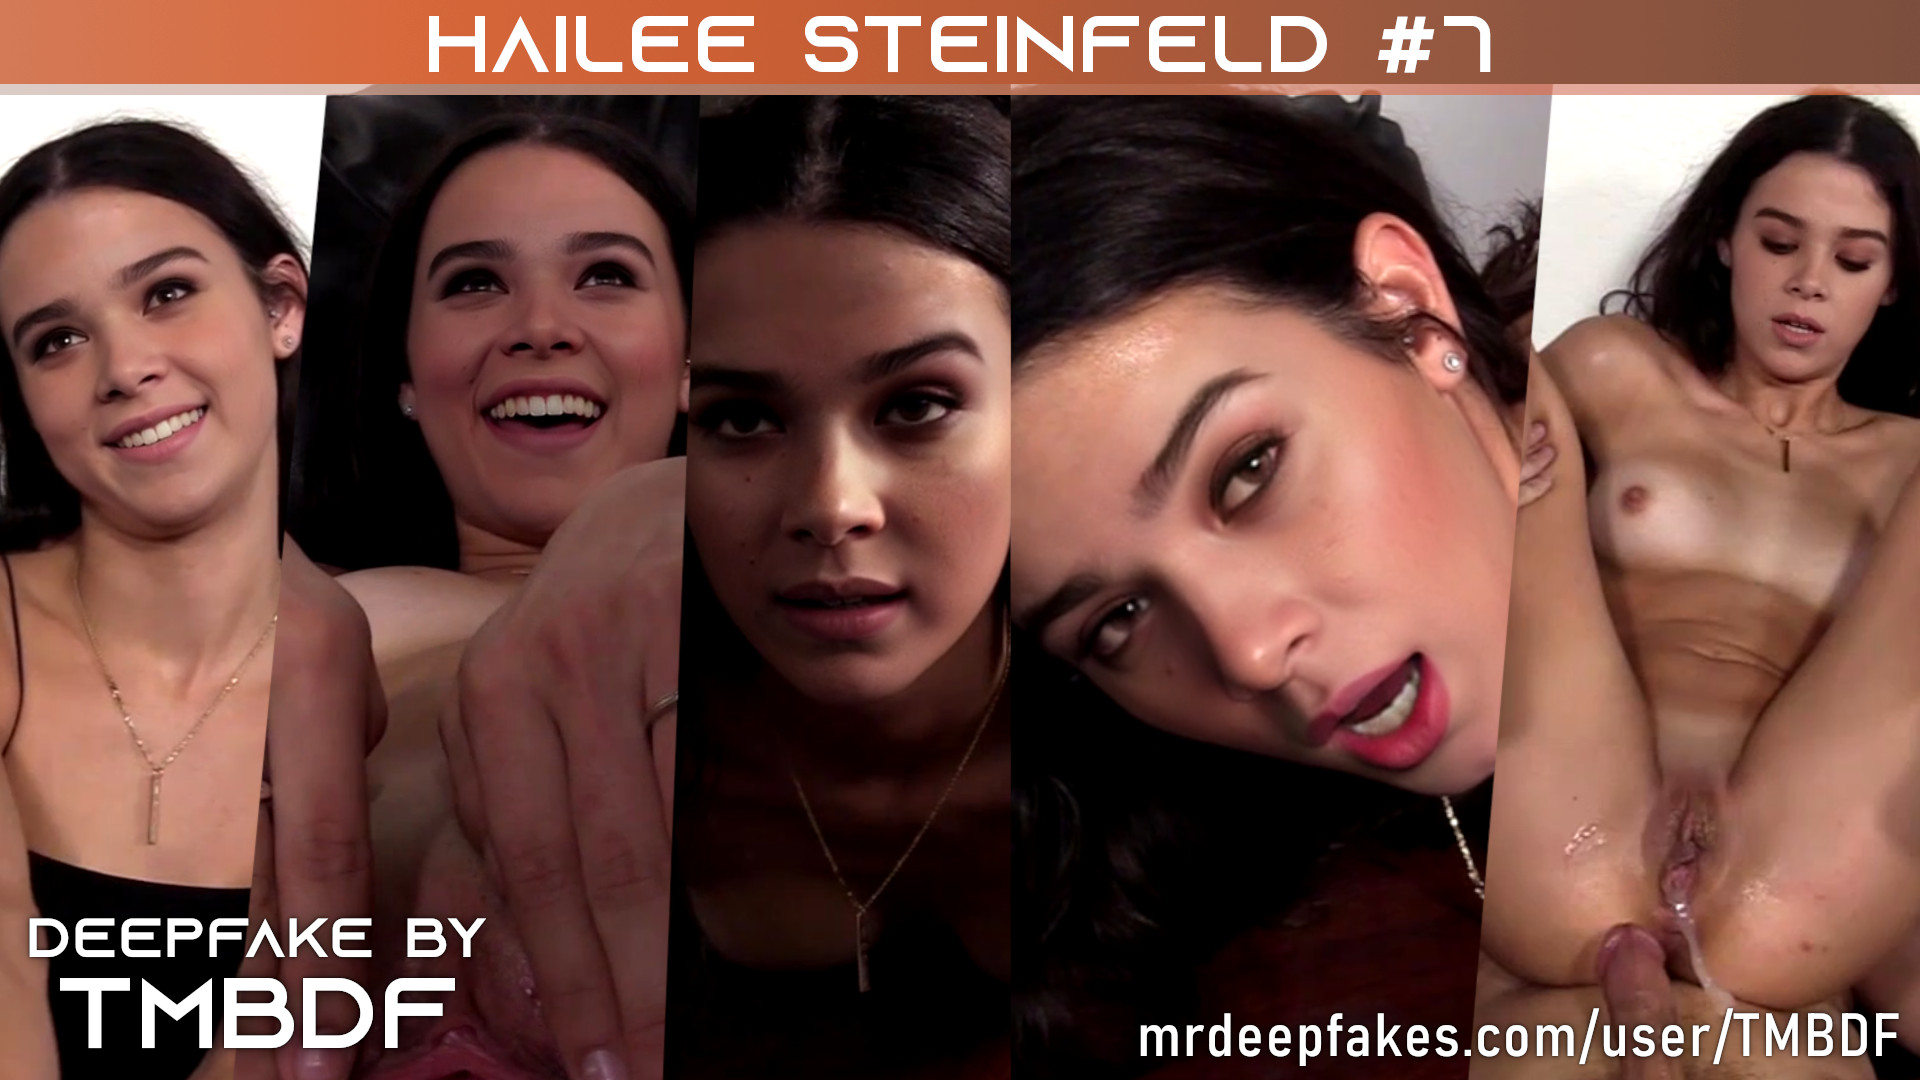 Hailee Steinfeld casting ends with a creampie #7 Preview (36:00)